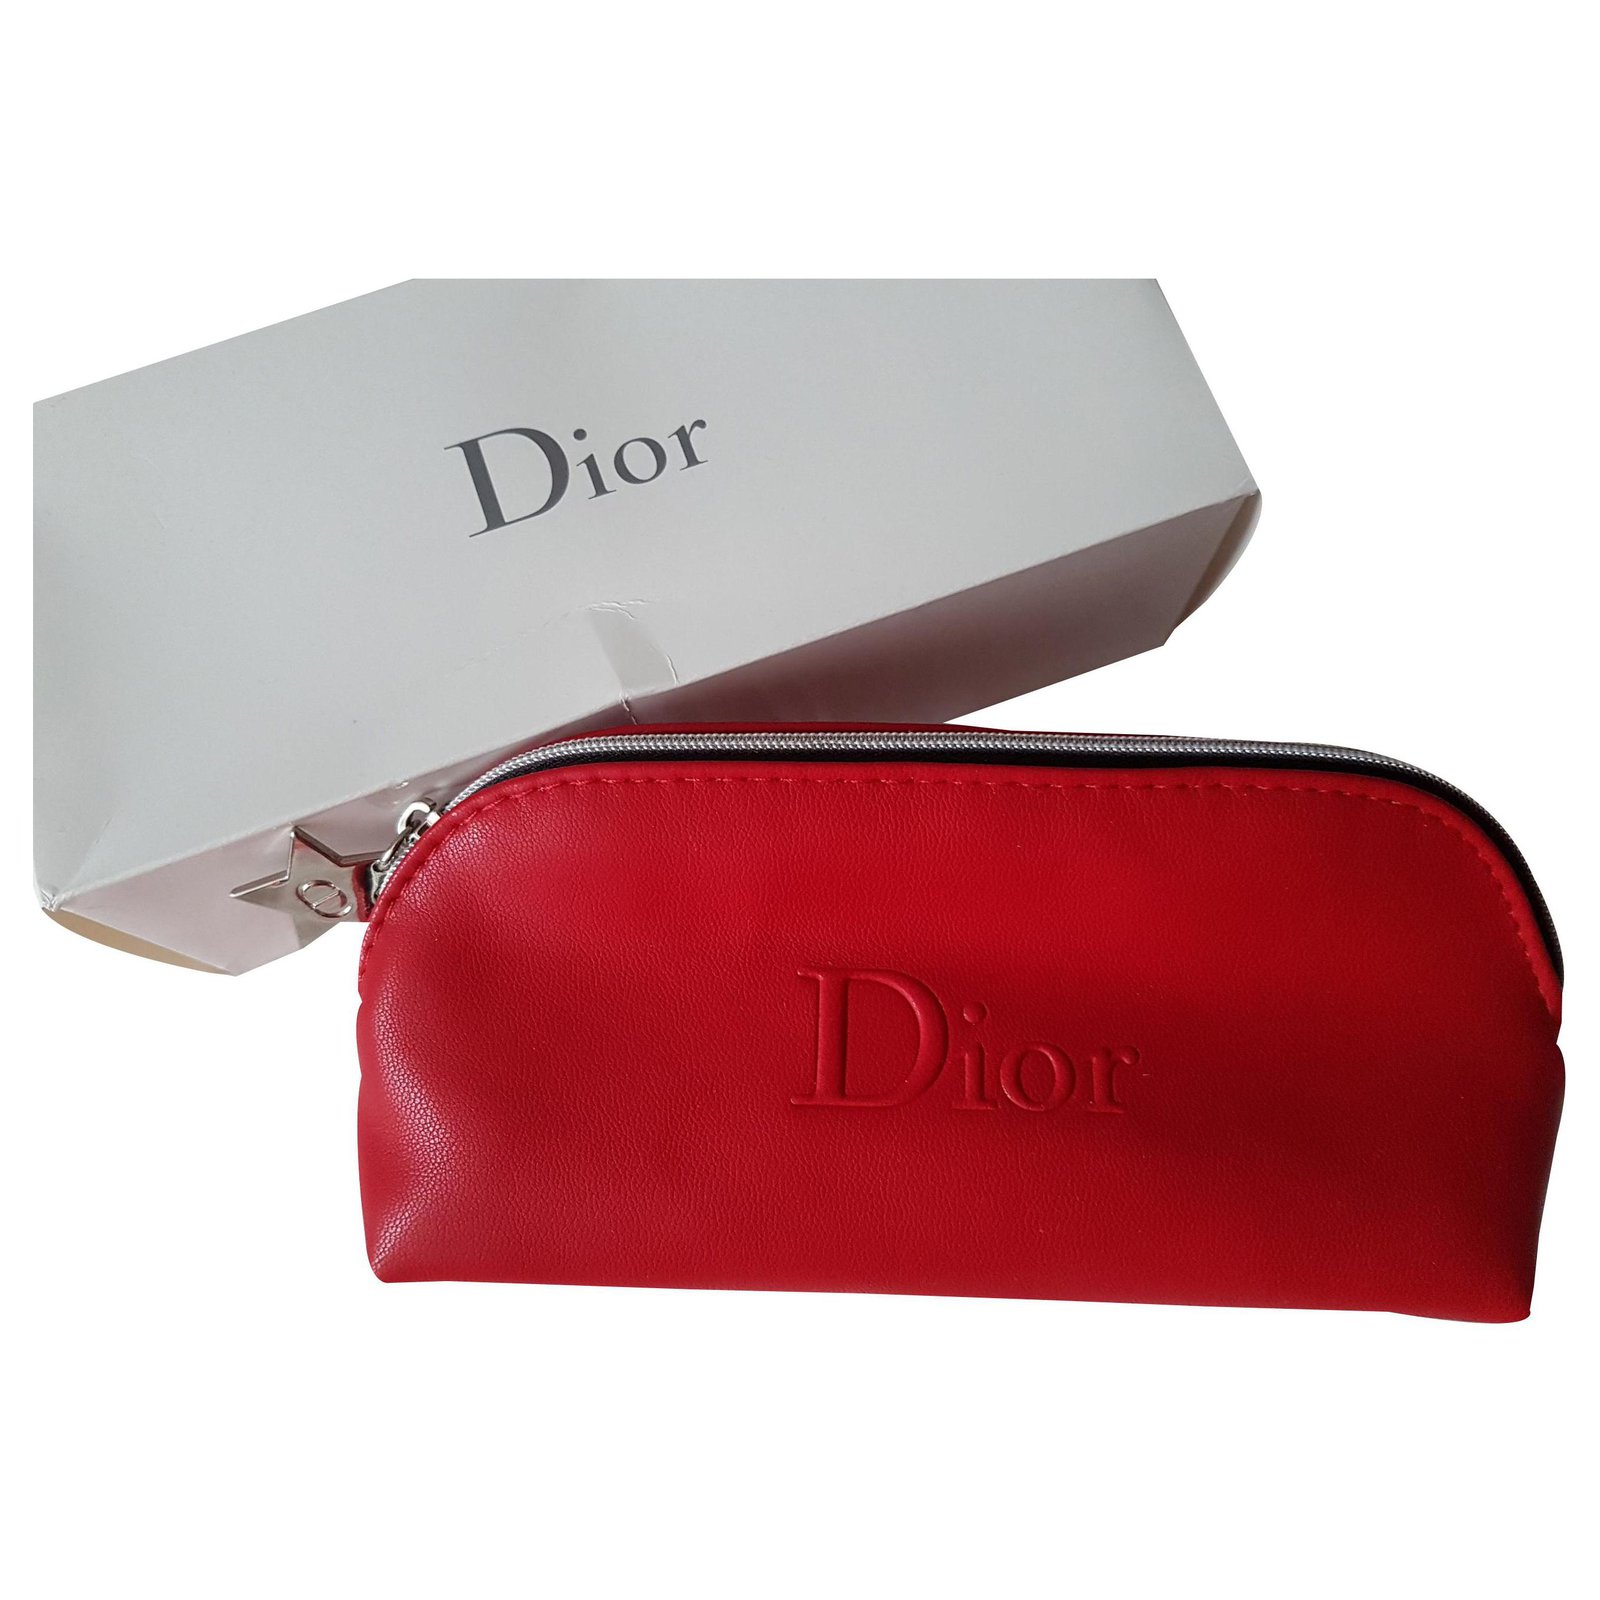 Dior POUCH VIP gifts Polyurethane Red 